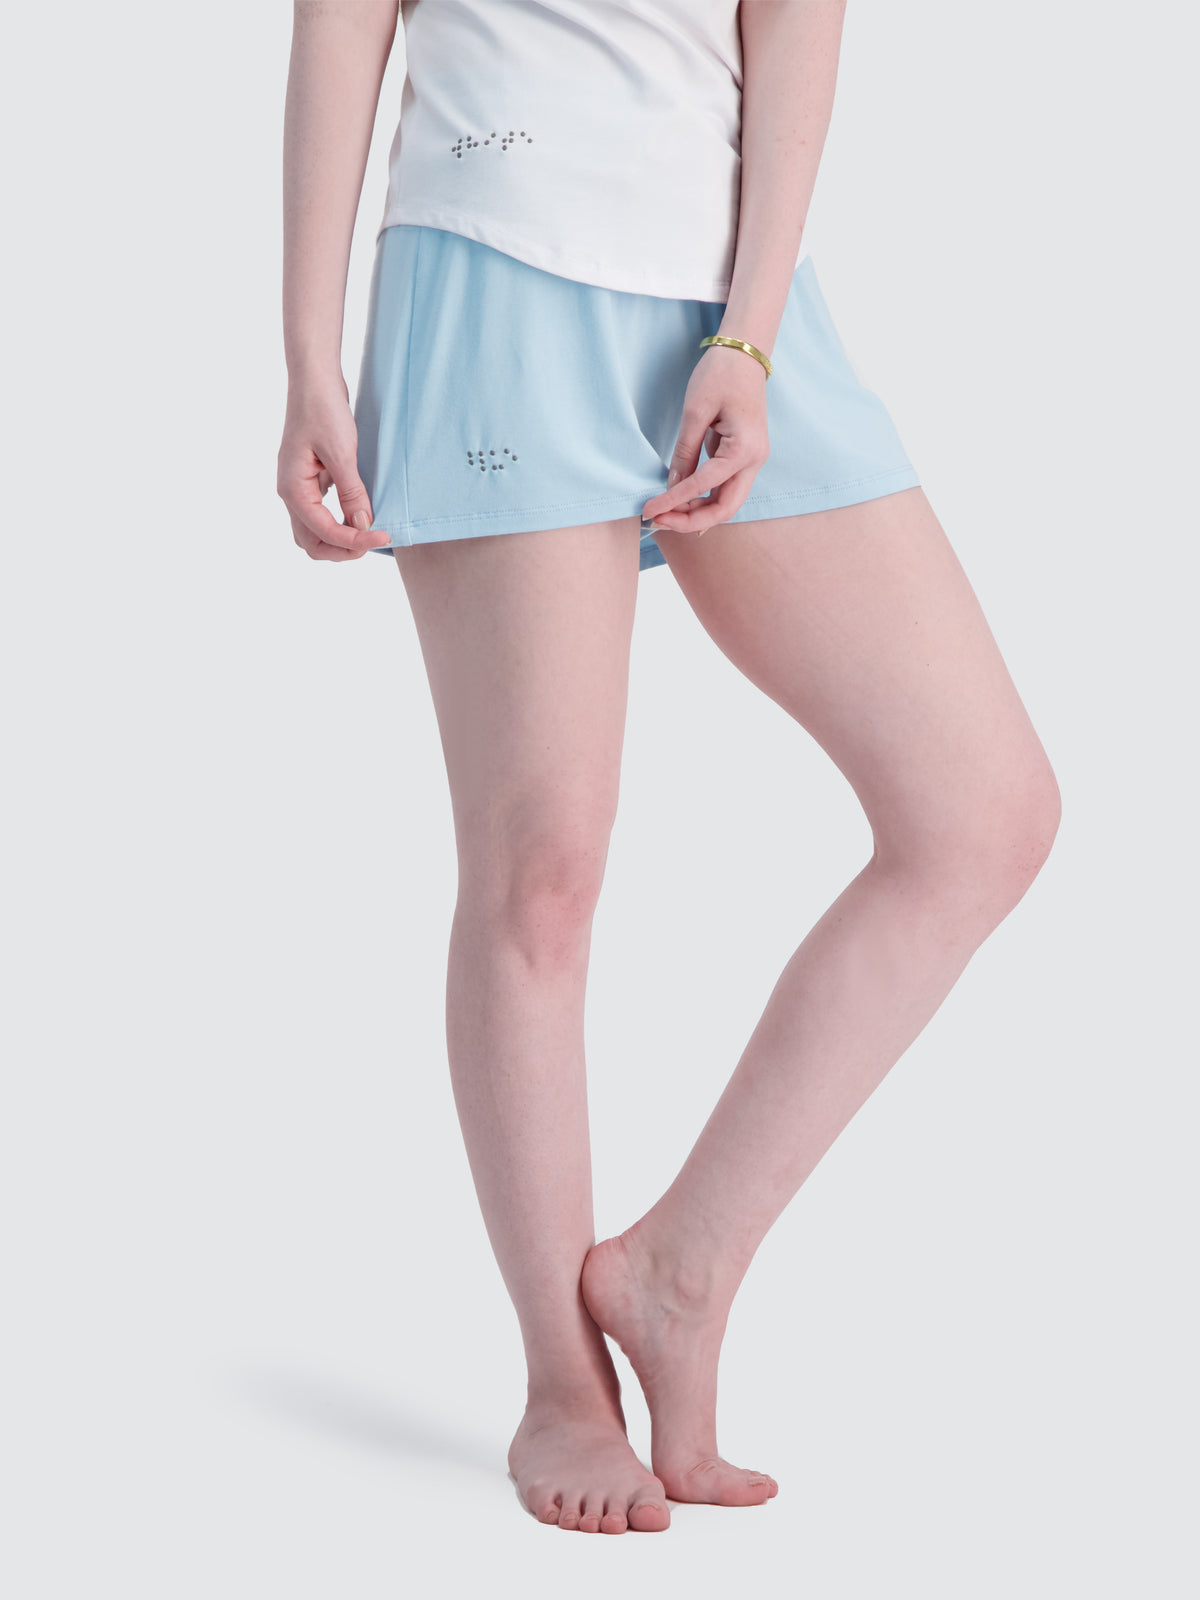 Two Blind Brothers - Womens Women's Lounge Shorts Light-Blue